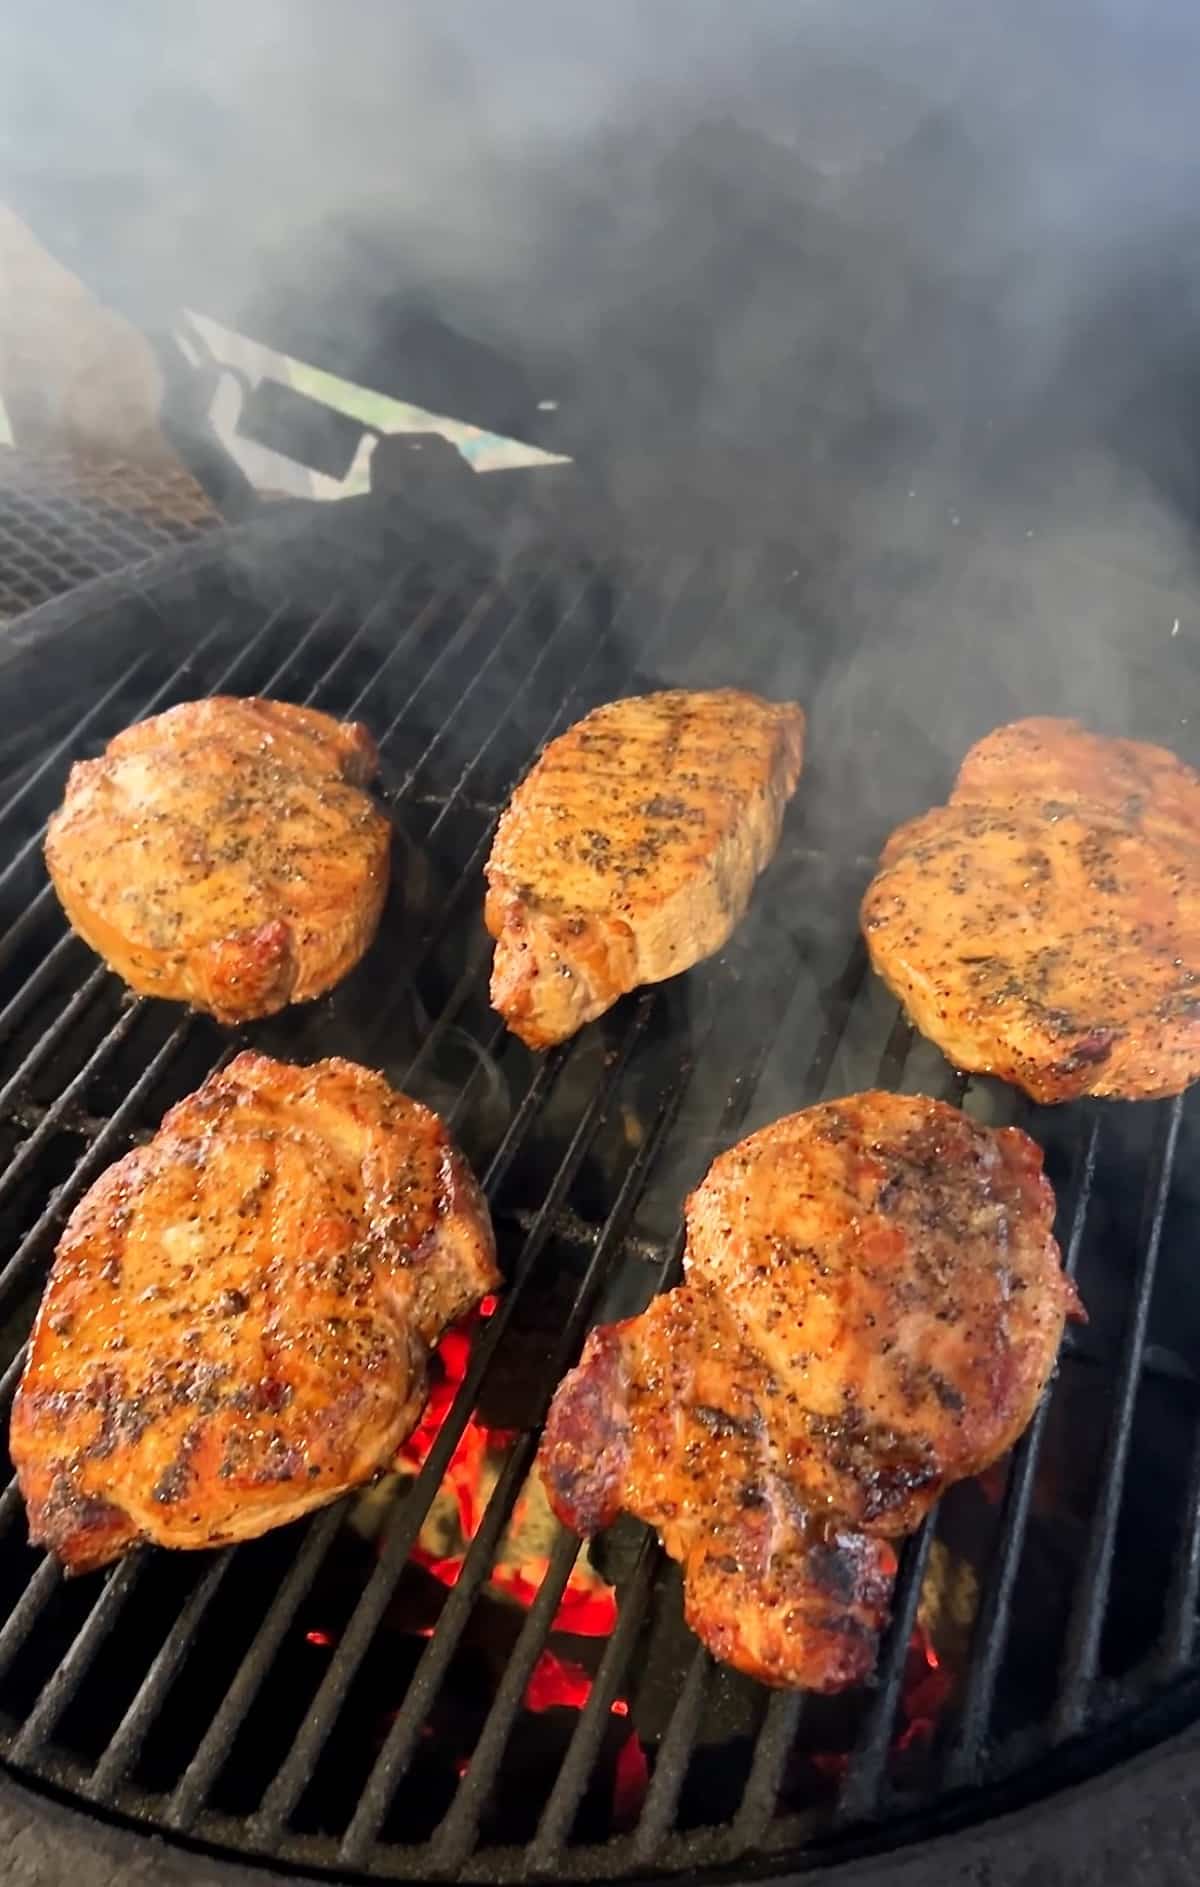 Grill with 5 pork chops.